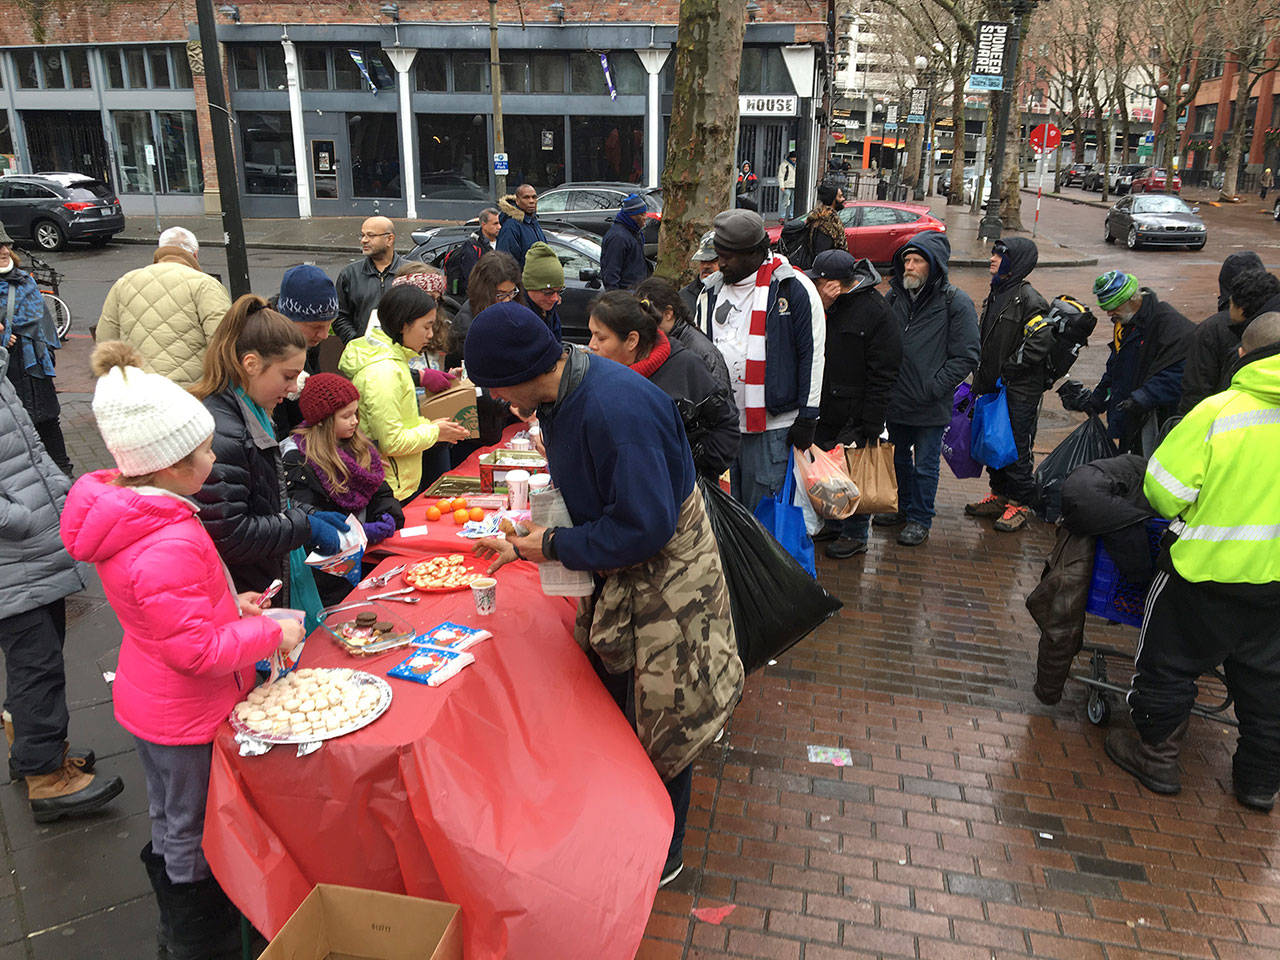 Mercer Island Cadette Girl Scout Troop 44297 members serve coffee, clementines and cookies in Pioneer Square on Dec. 25. Photo courtesy of Terese Broccoli